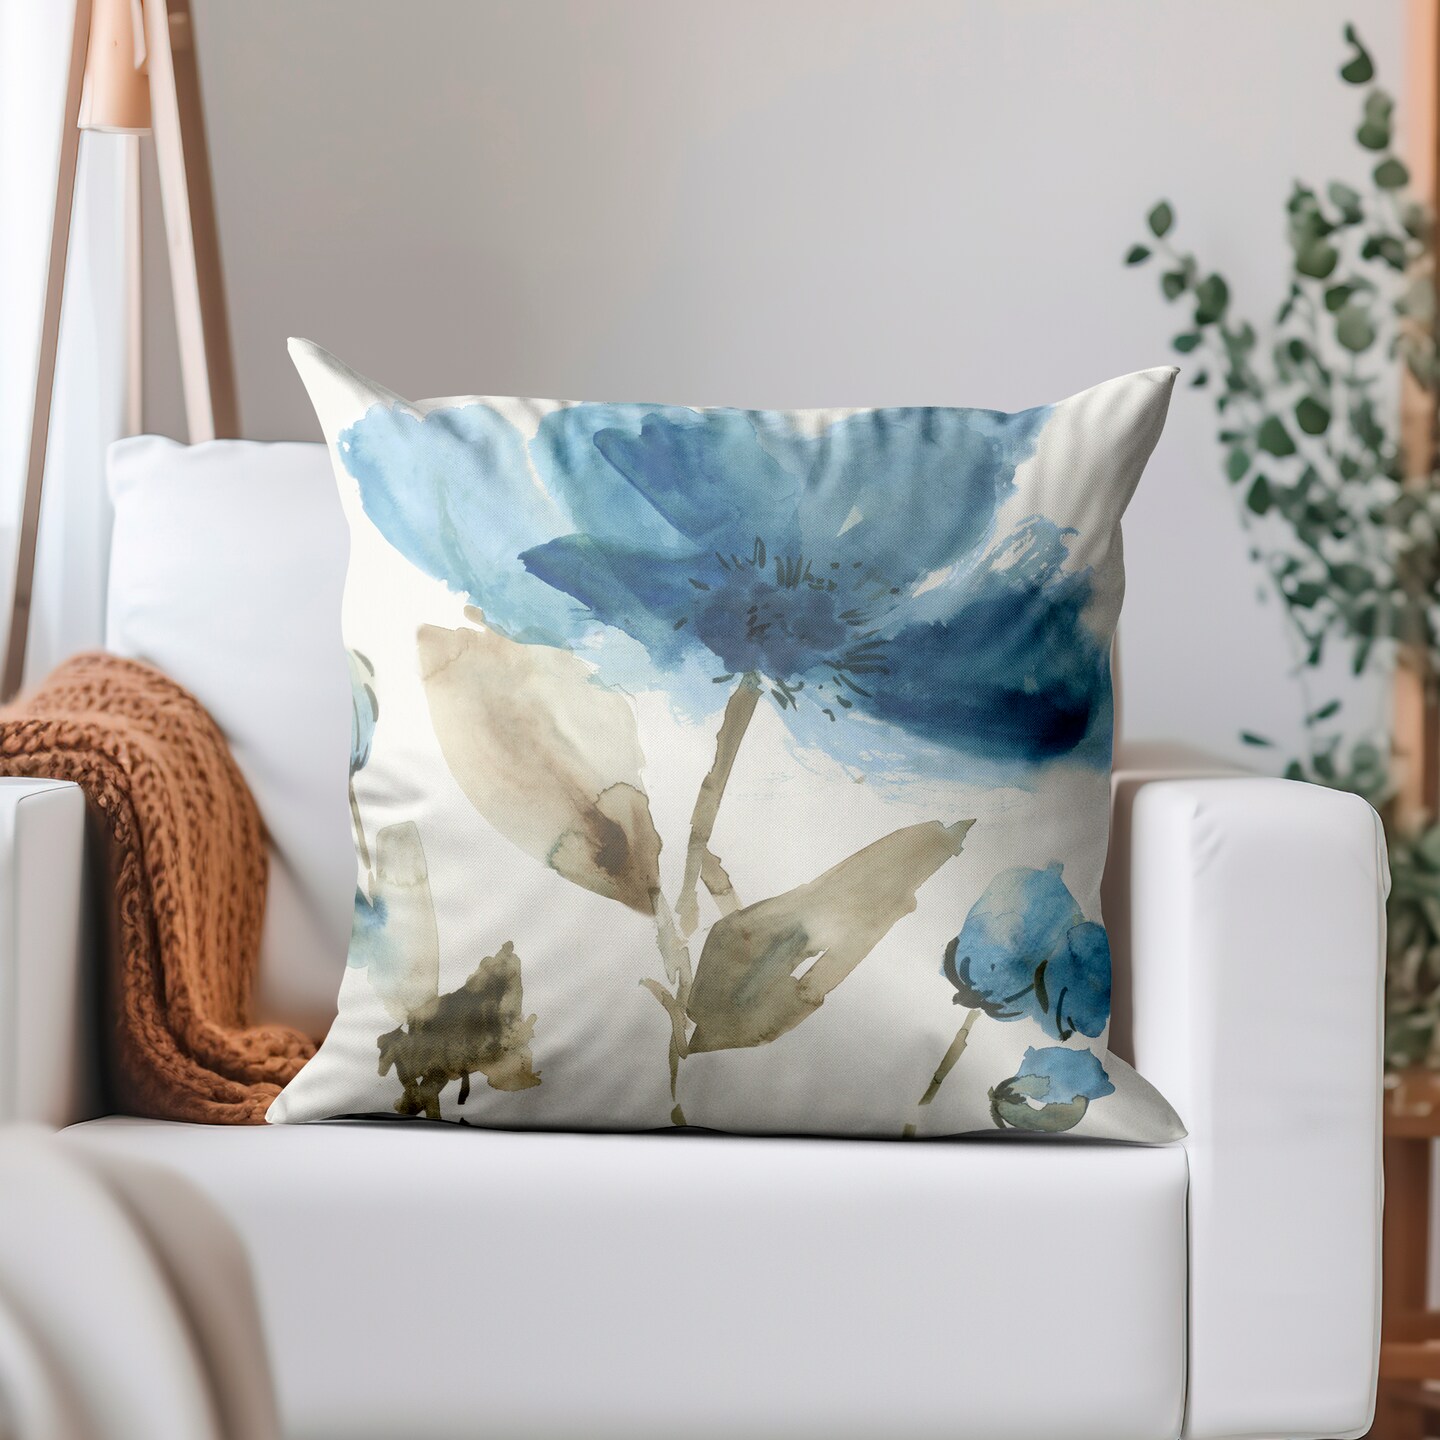 Blue Morning Ii by PI Creative Art Americanflat Decorative Pillow